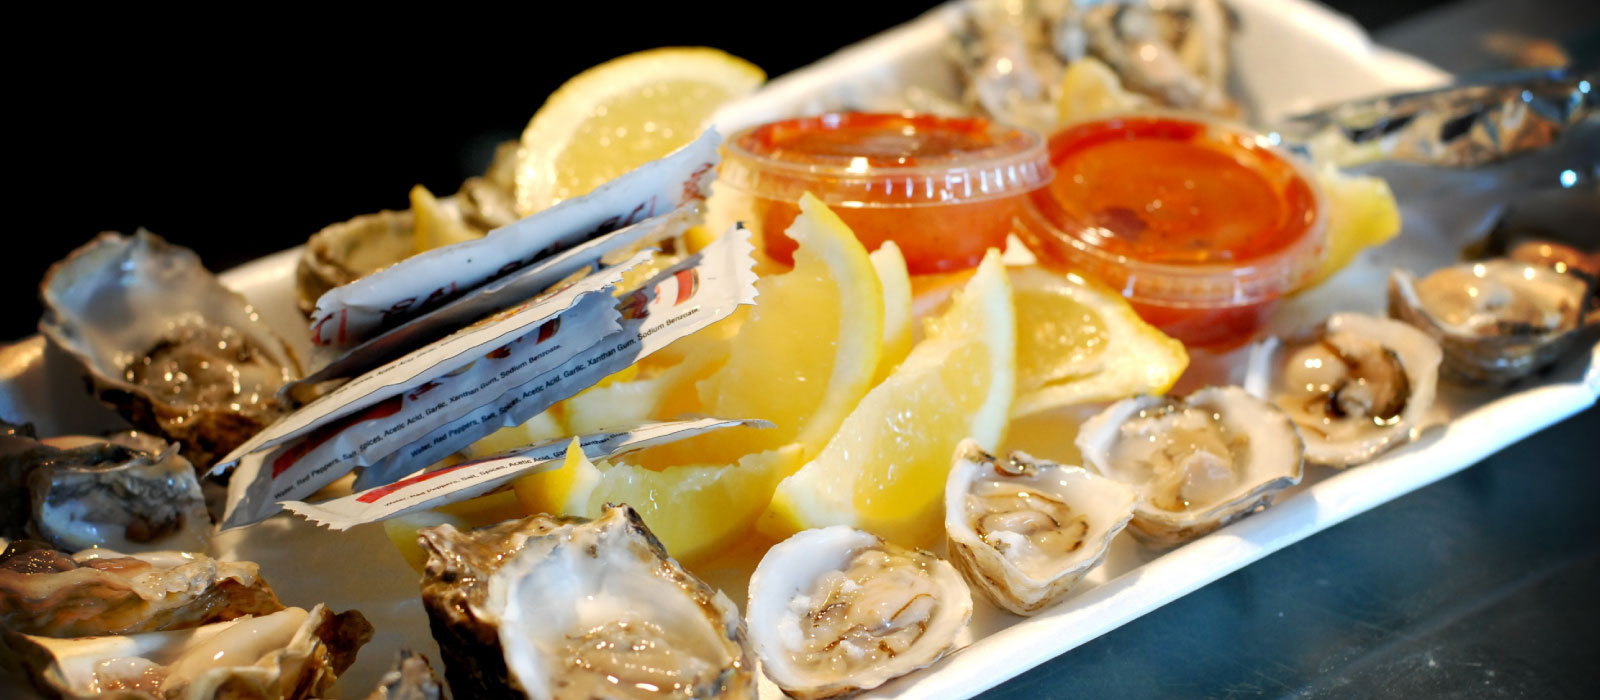 Oysters are delicious, healthy to eat, and good for the environment!